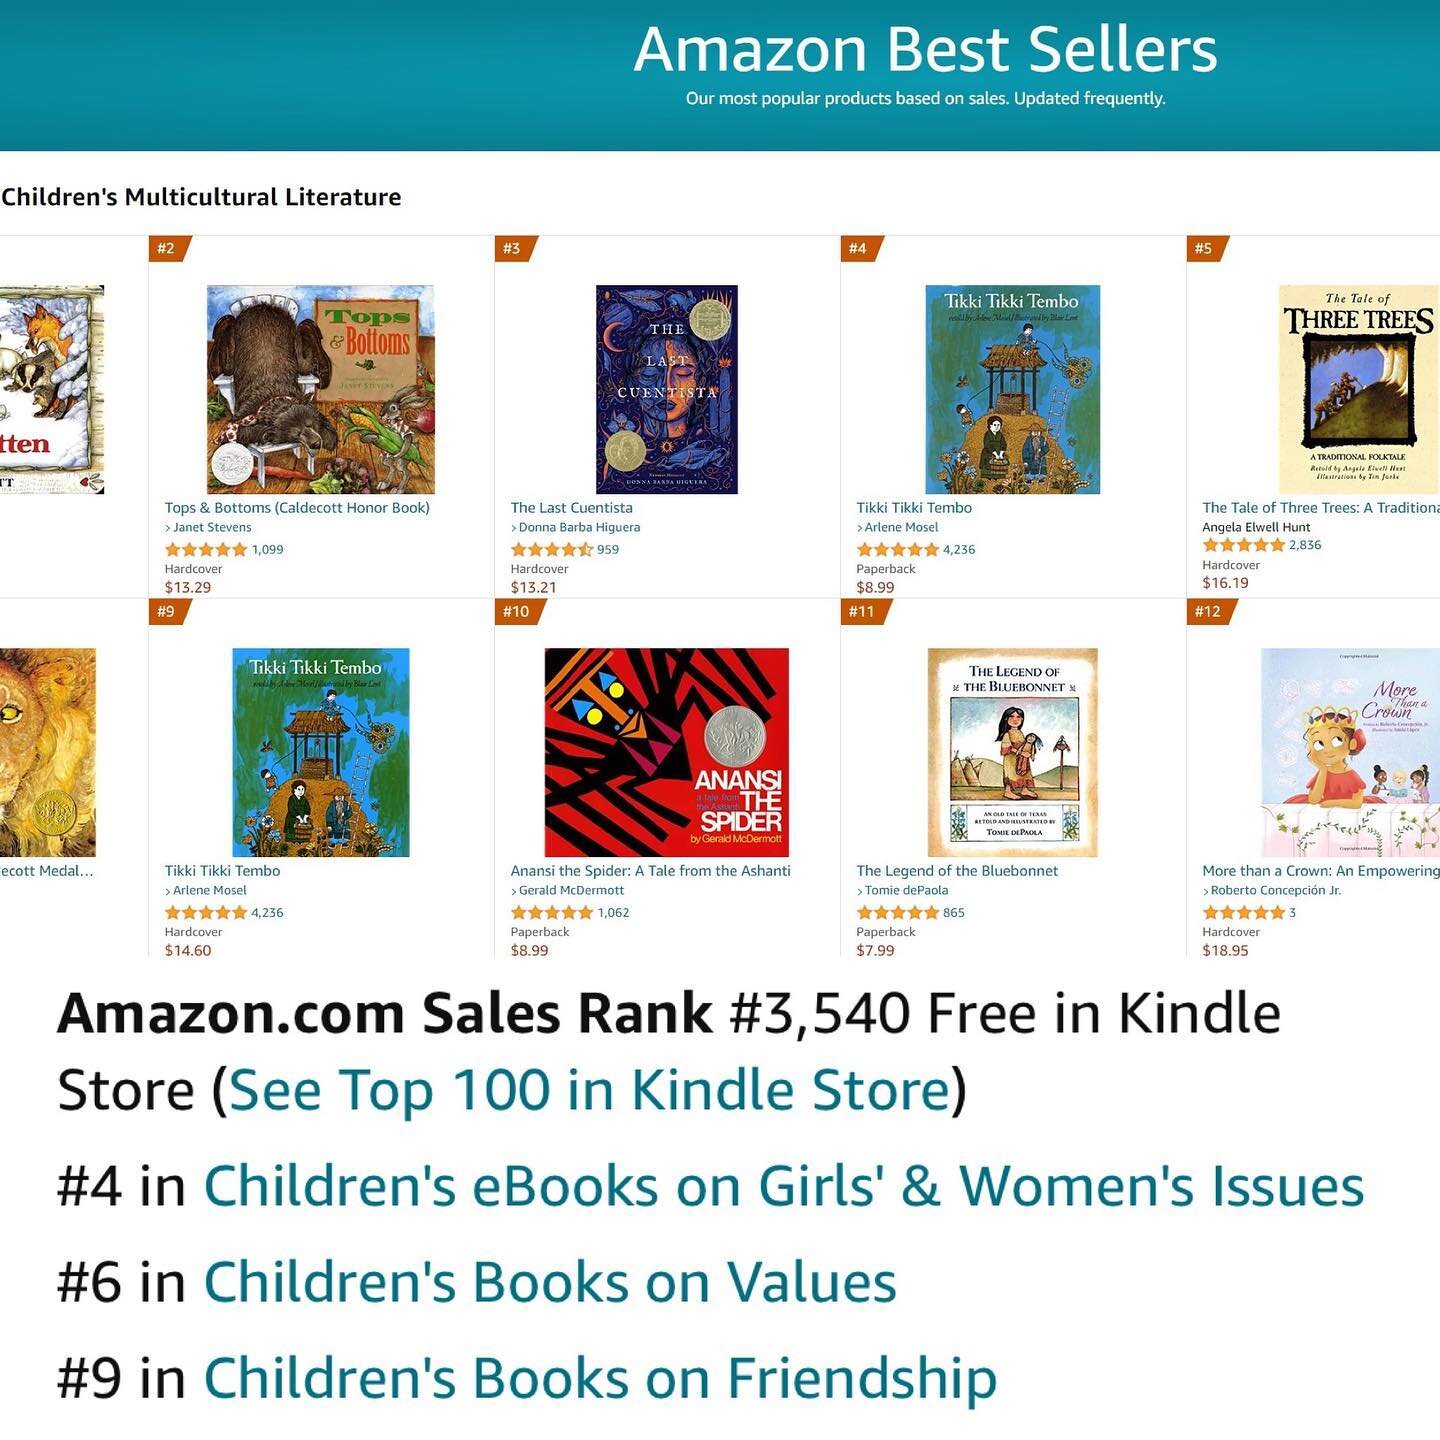 In its first week, &ldquo;More Than a Crown&rdquo; has topped the Amazon best sellers list 🏆  in several categories!  Incredibly grateful. 🥰
#4 in Children&rsquo;s eBooks on Girls&rsquo; &amp; Women&rsquo;s Issues 👧🏽
#6 in Children&rsquo;s Books 